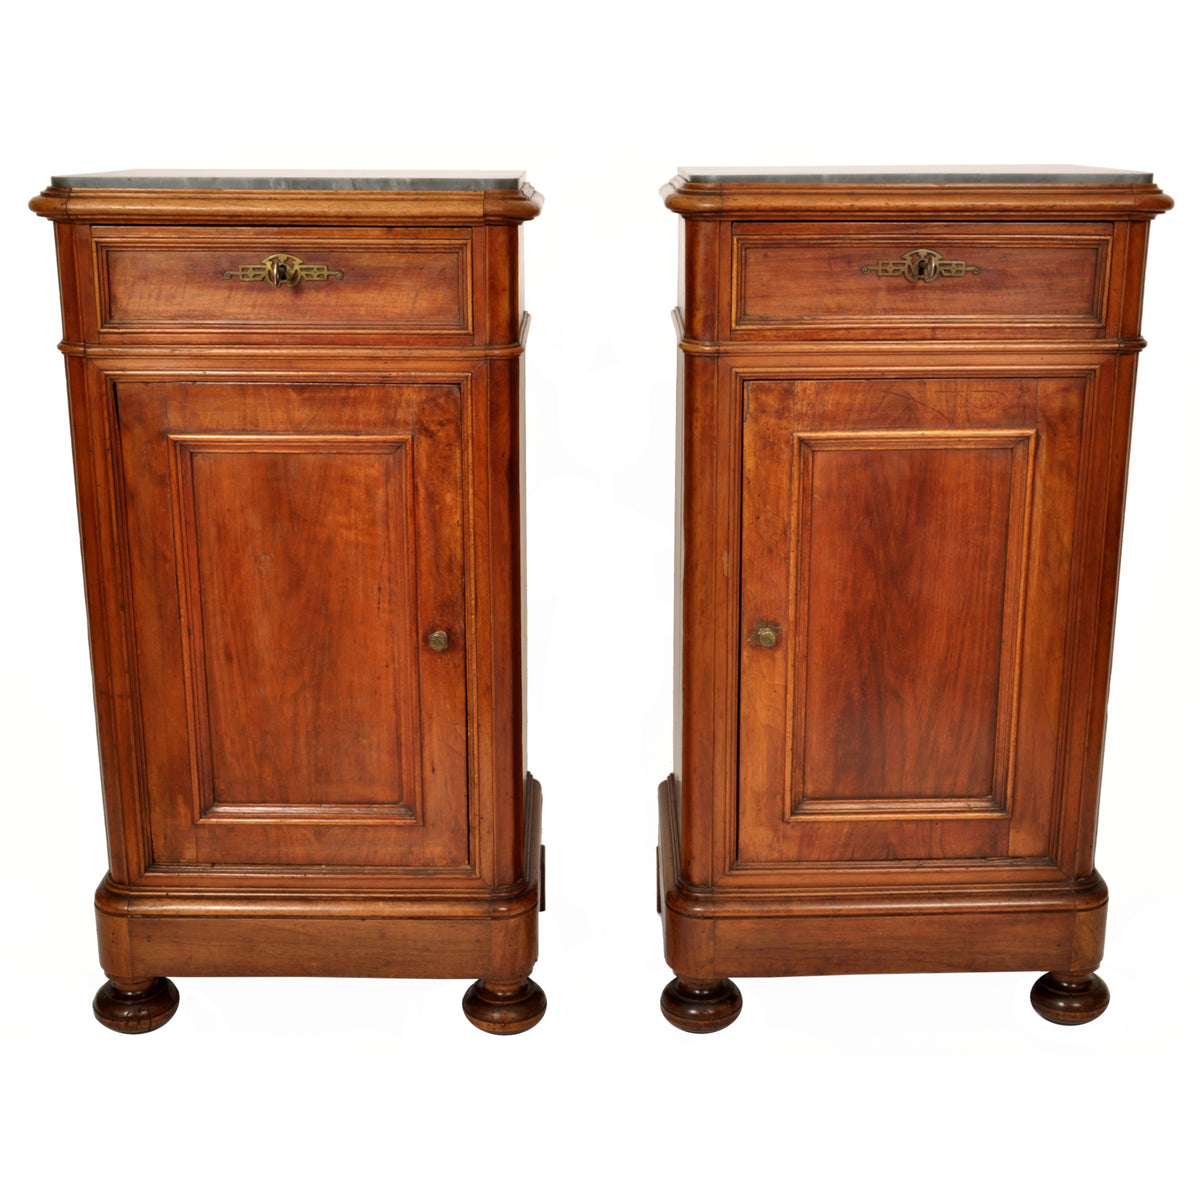 Pair of Antique 19th Century Italian Marble Top Night Stands / Cabinets, circa 1880